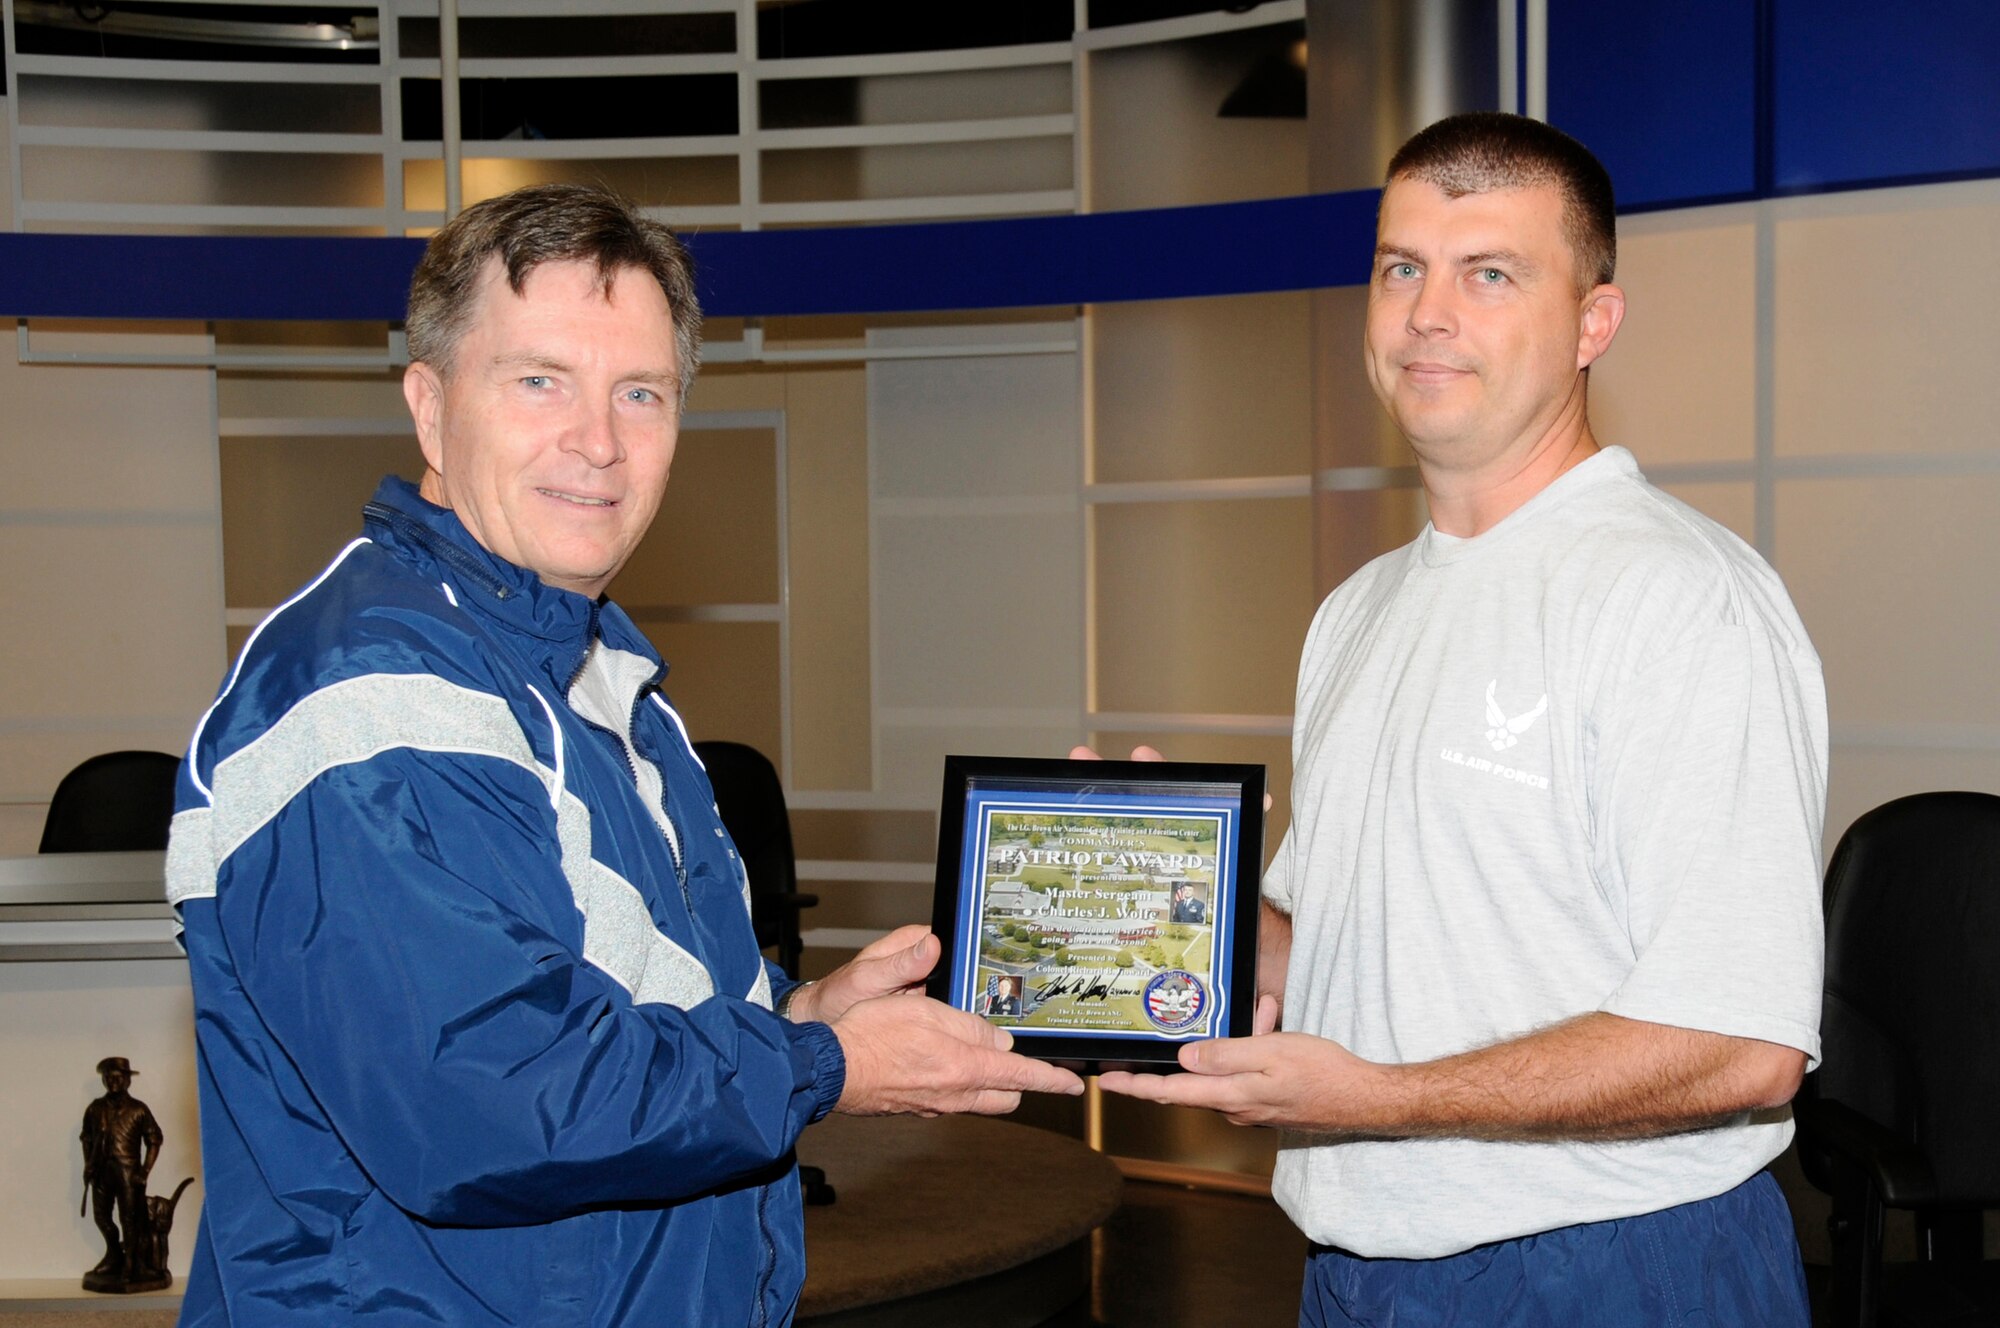 McGHEE TYSON AIR NATIONAL GUARD BASE, Tenn. - Col. Richard B. Howard, left, commander of The I.G. Brown Air National Guard Training and Education Center here, presents his Patriot Award to Master Sgt. Jason Wolfe, right, NCOIC of infrastructure management for the communications focal point section, for recognition of his contributions to the center, Nov. 24, 2010. The Patriot Award is Howard's personal award to show appreciation for those he feels have gone above and beyond in their service. (U.S. Air Force photo by Master Sgt. Kurt Skoglund/Released)